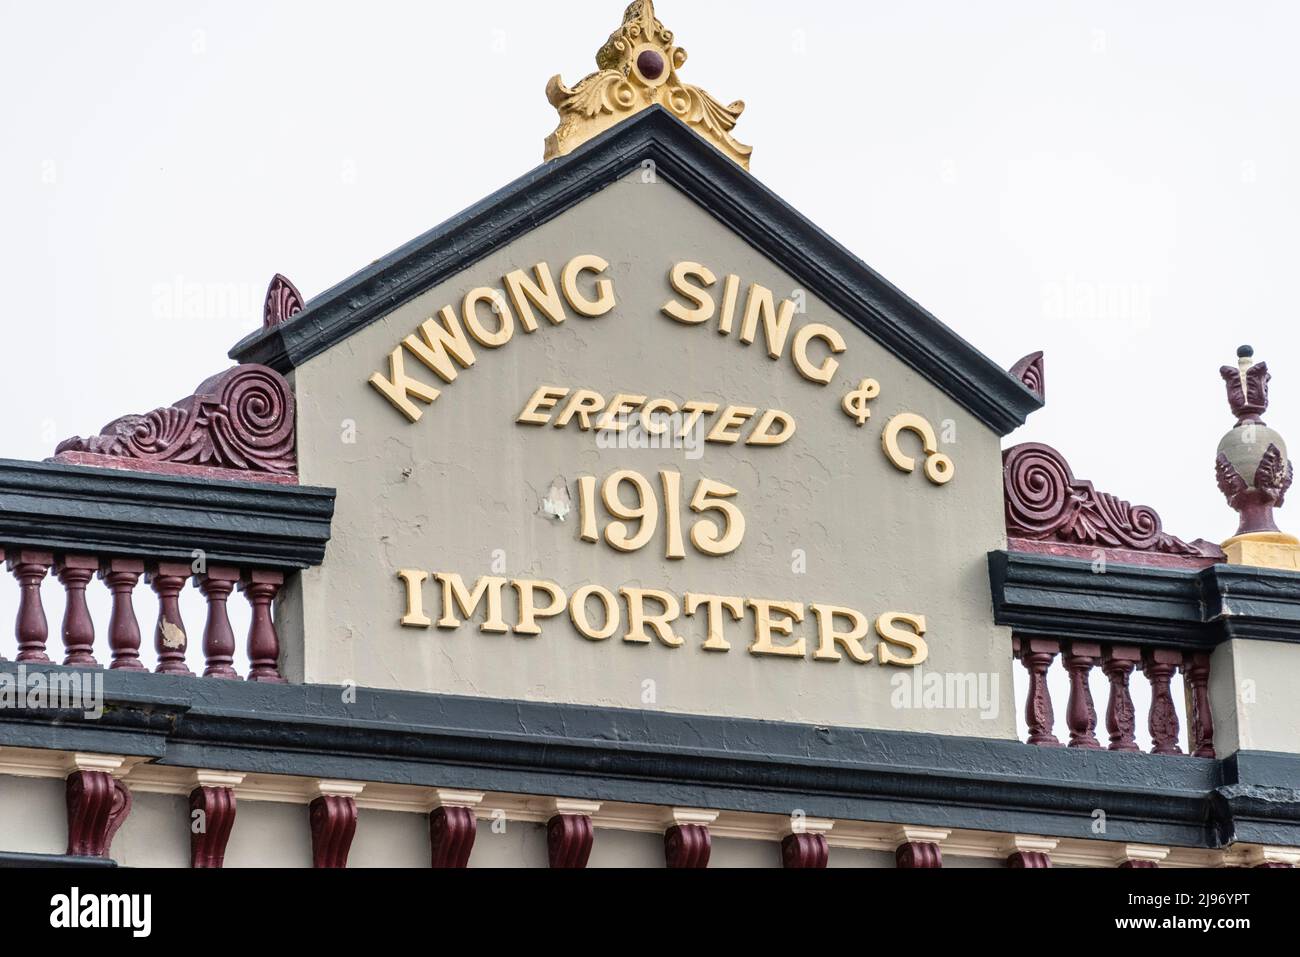 The heritage Kwong Sing building in Glen Innes, new south wales, australia Stock Photo